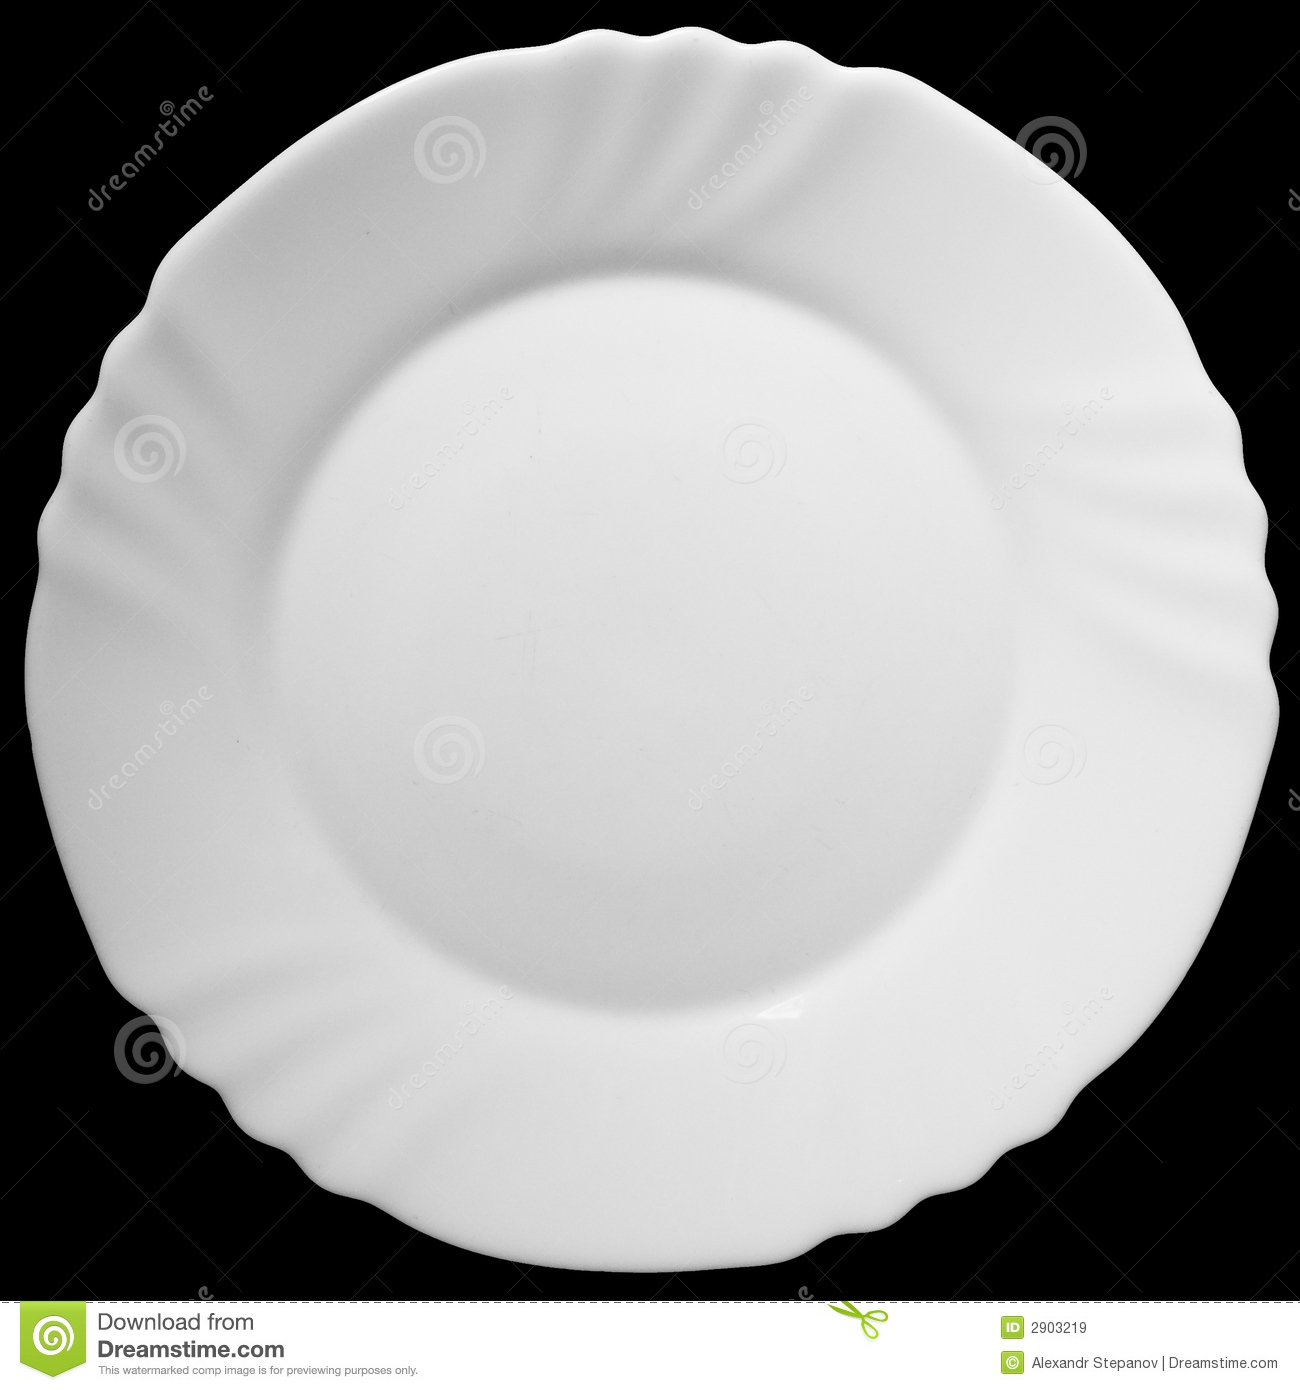 Plate Clipart Black And White The White Plate On A Black